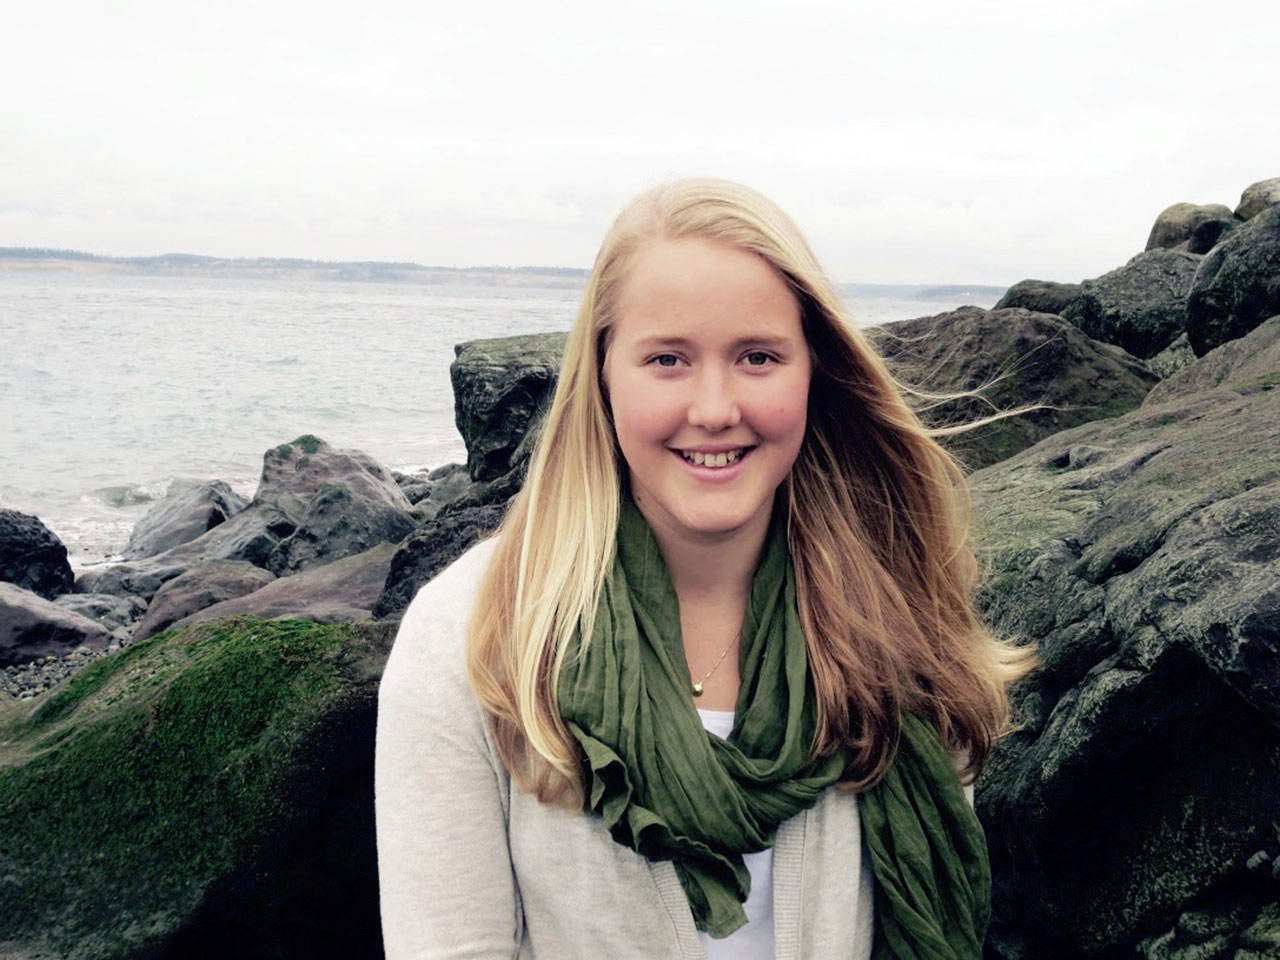 Port Townsend native Eliza Dawson, a student at the University of Washington, will talk at the Northwest Maritime Center at 7 p.m. Sunday about her plans to row from California to Hawaii to raise awareness to climate change.